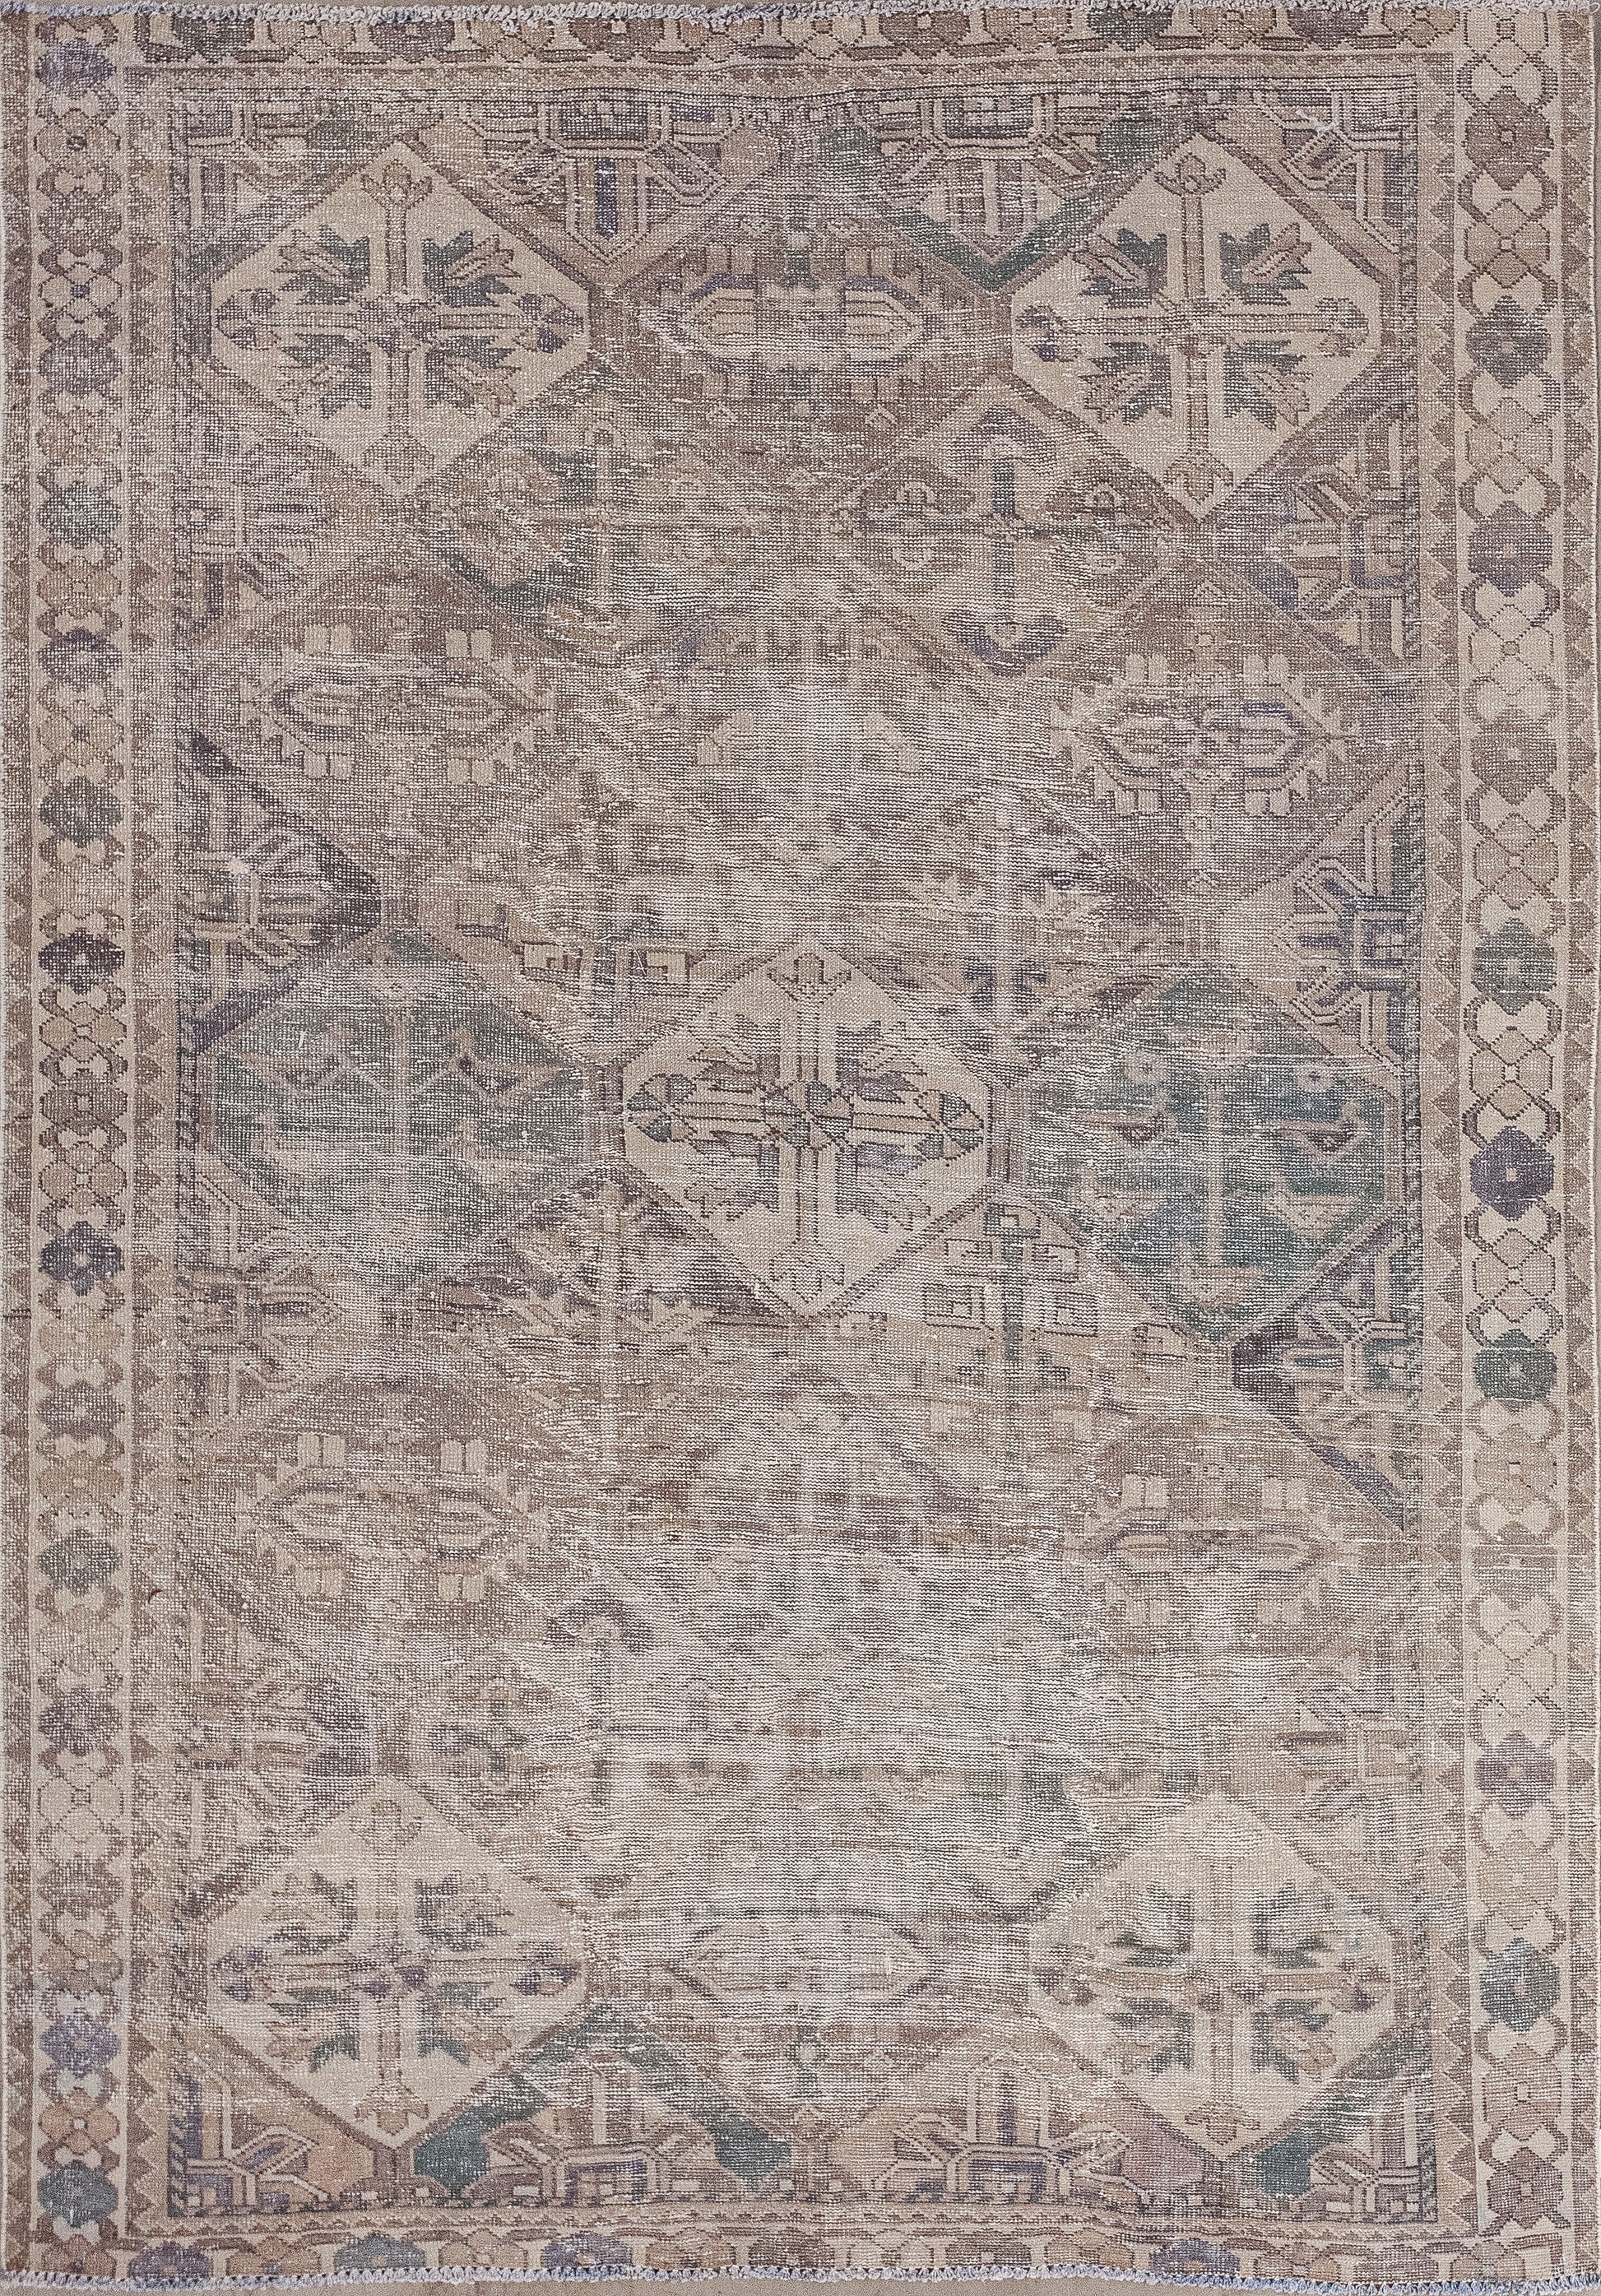 Vintage rug comes with an interesting pattern in the center. The color scheme is within beige, brown, green, and purple with the circa trend finish.